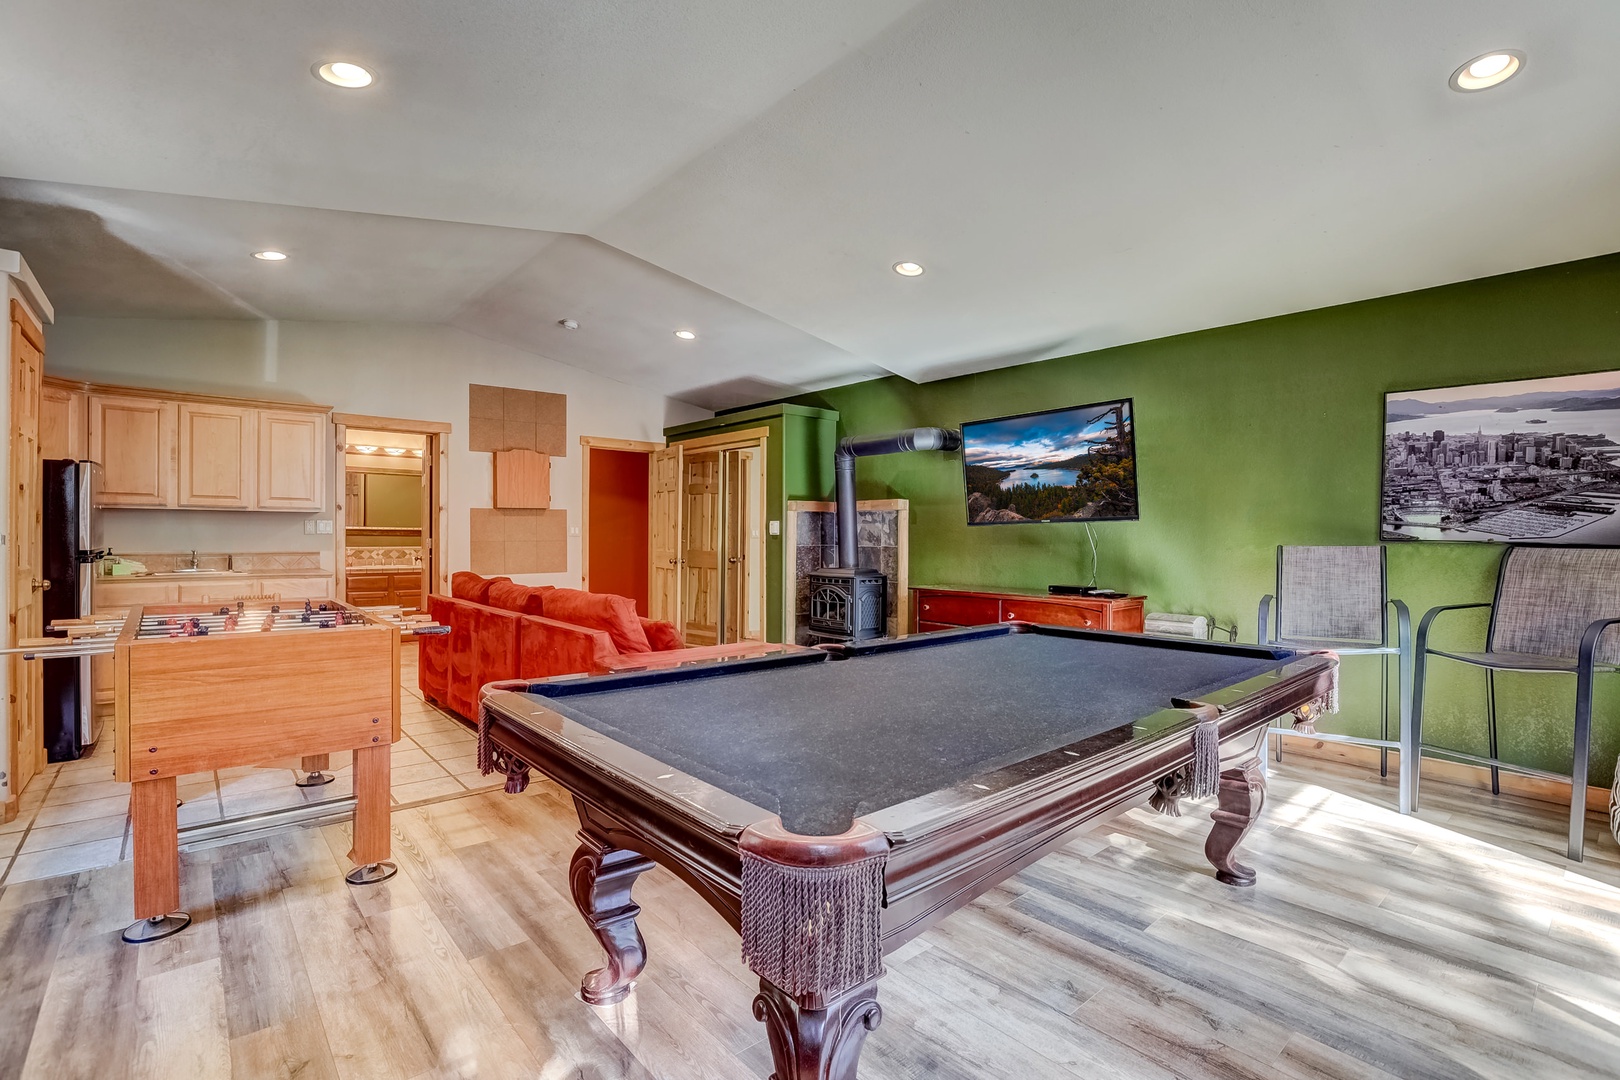 Game room with pool table, foosball table, dart board, cable TV